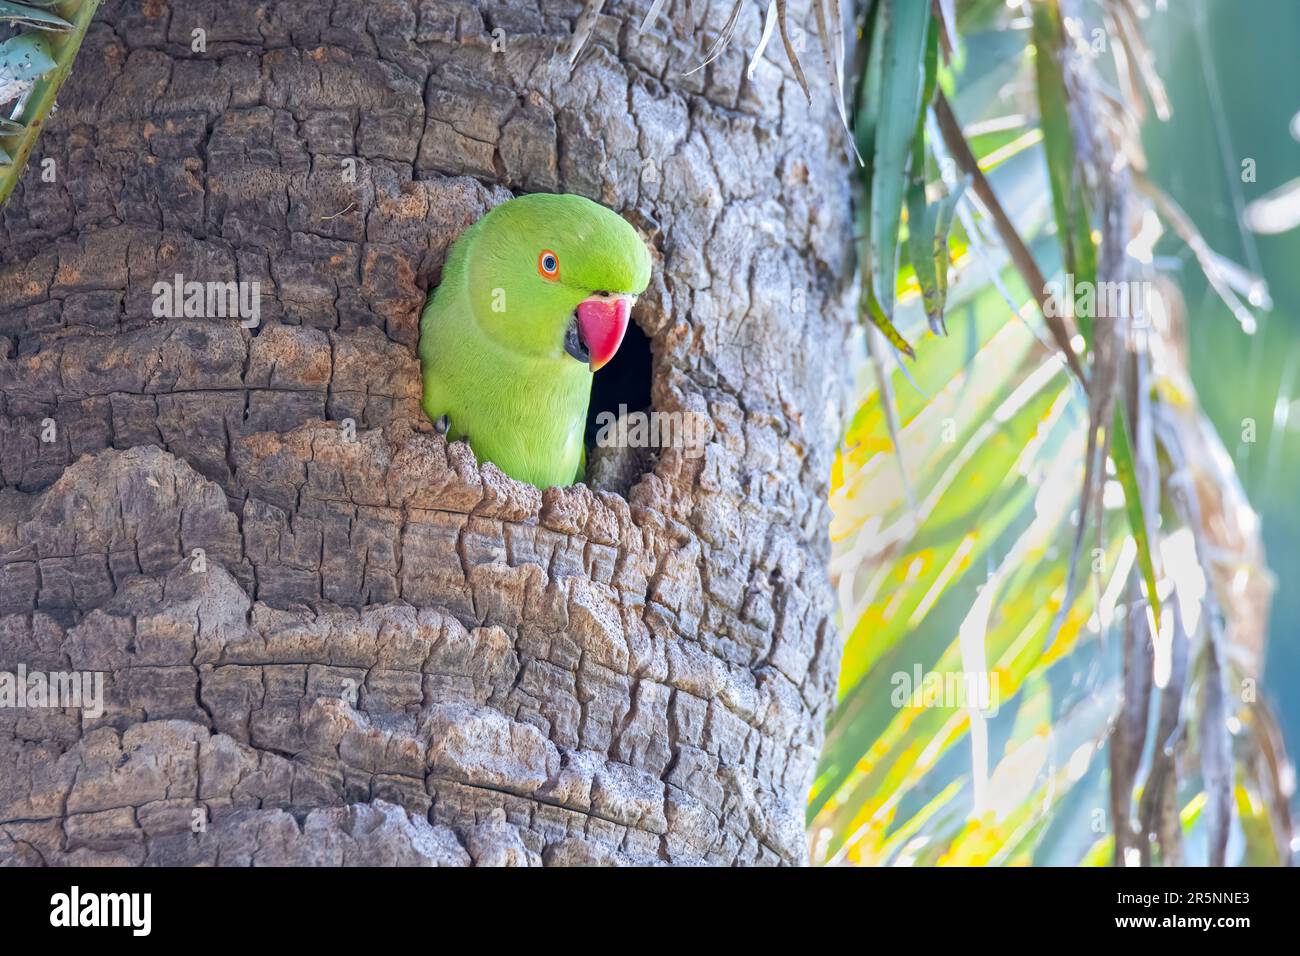 Premium Photo | Psittacula krameris rose ringed parakeet peering out of its  nest hole in a coconut tree trunk